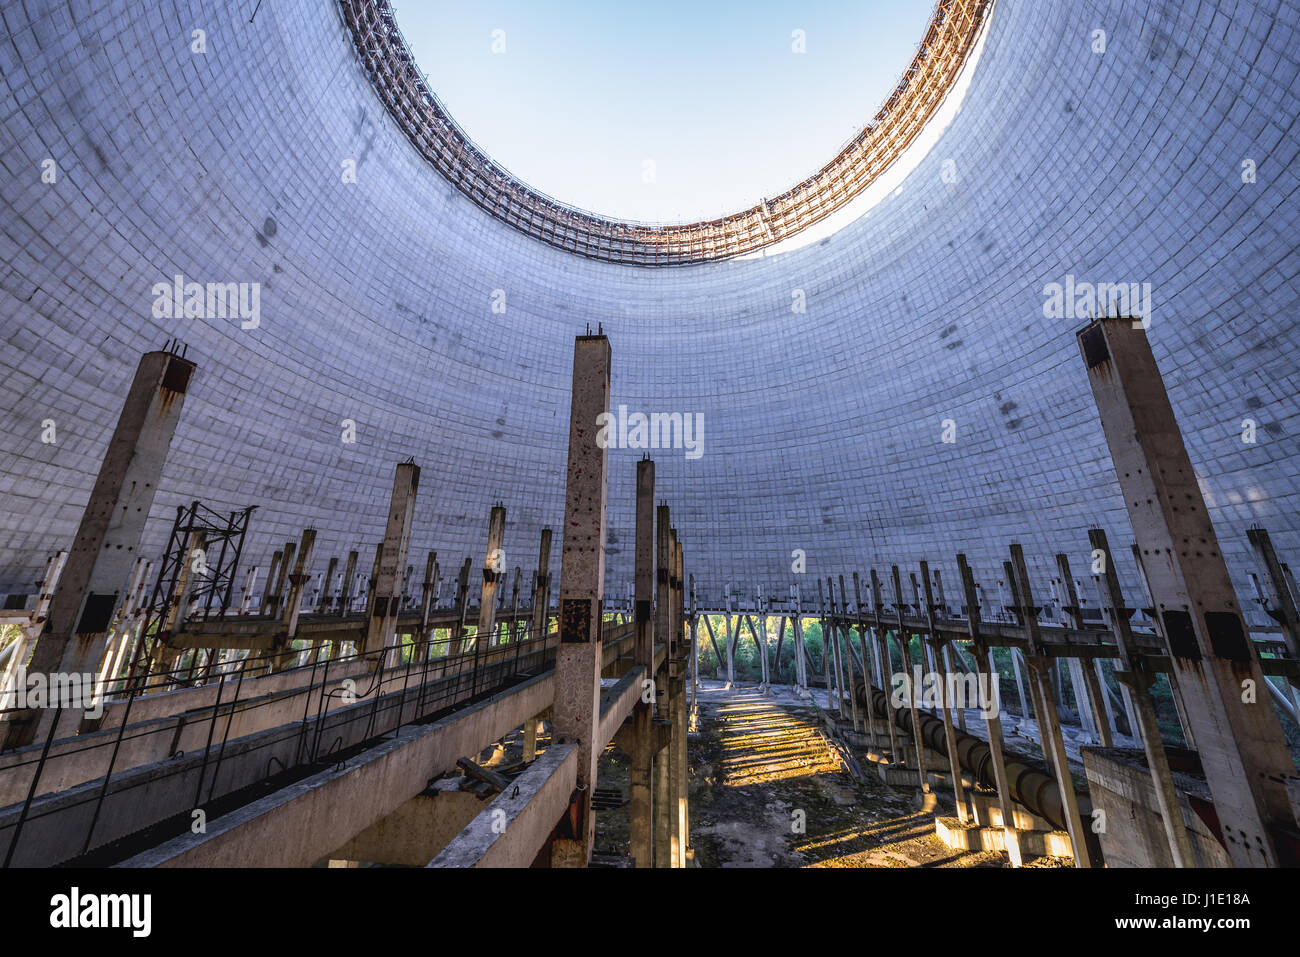 Inside the cooling tower of Chernobyl Nuclear Power Plant in Zone of Alienation around the nuclear reactor disaster in Ukraine Stock Photo